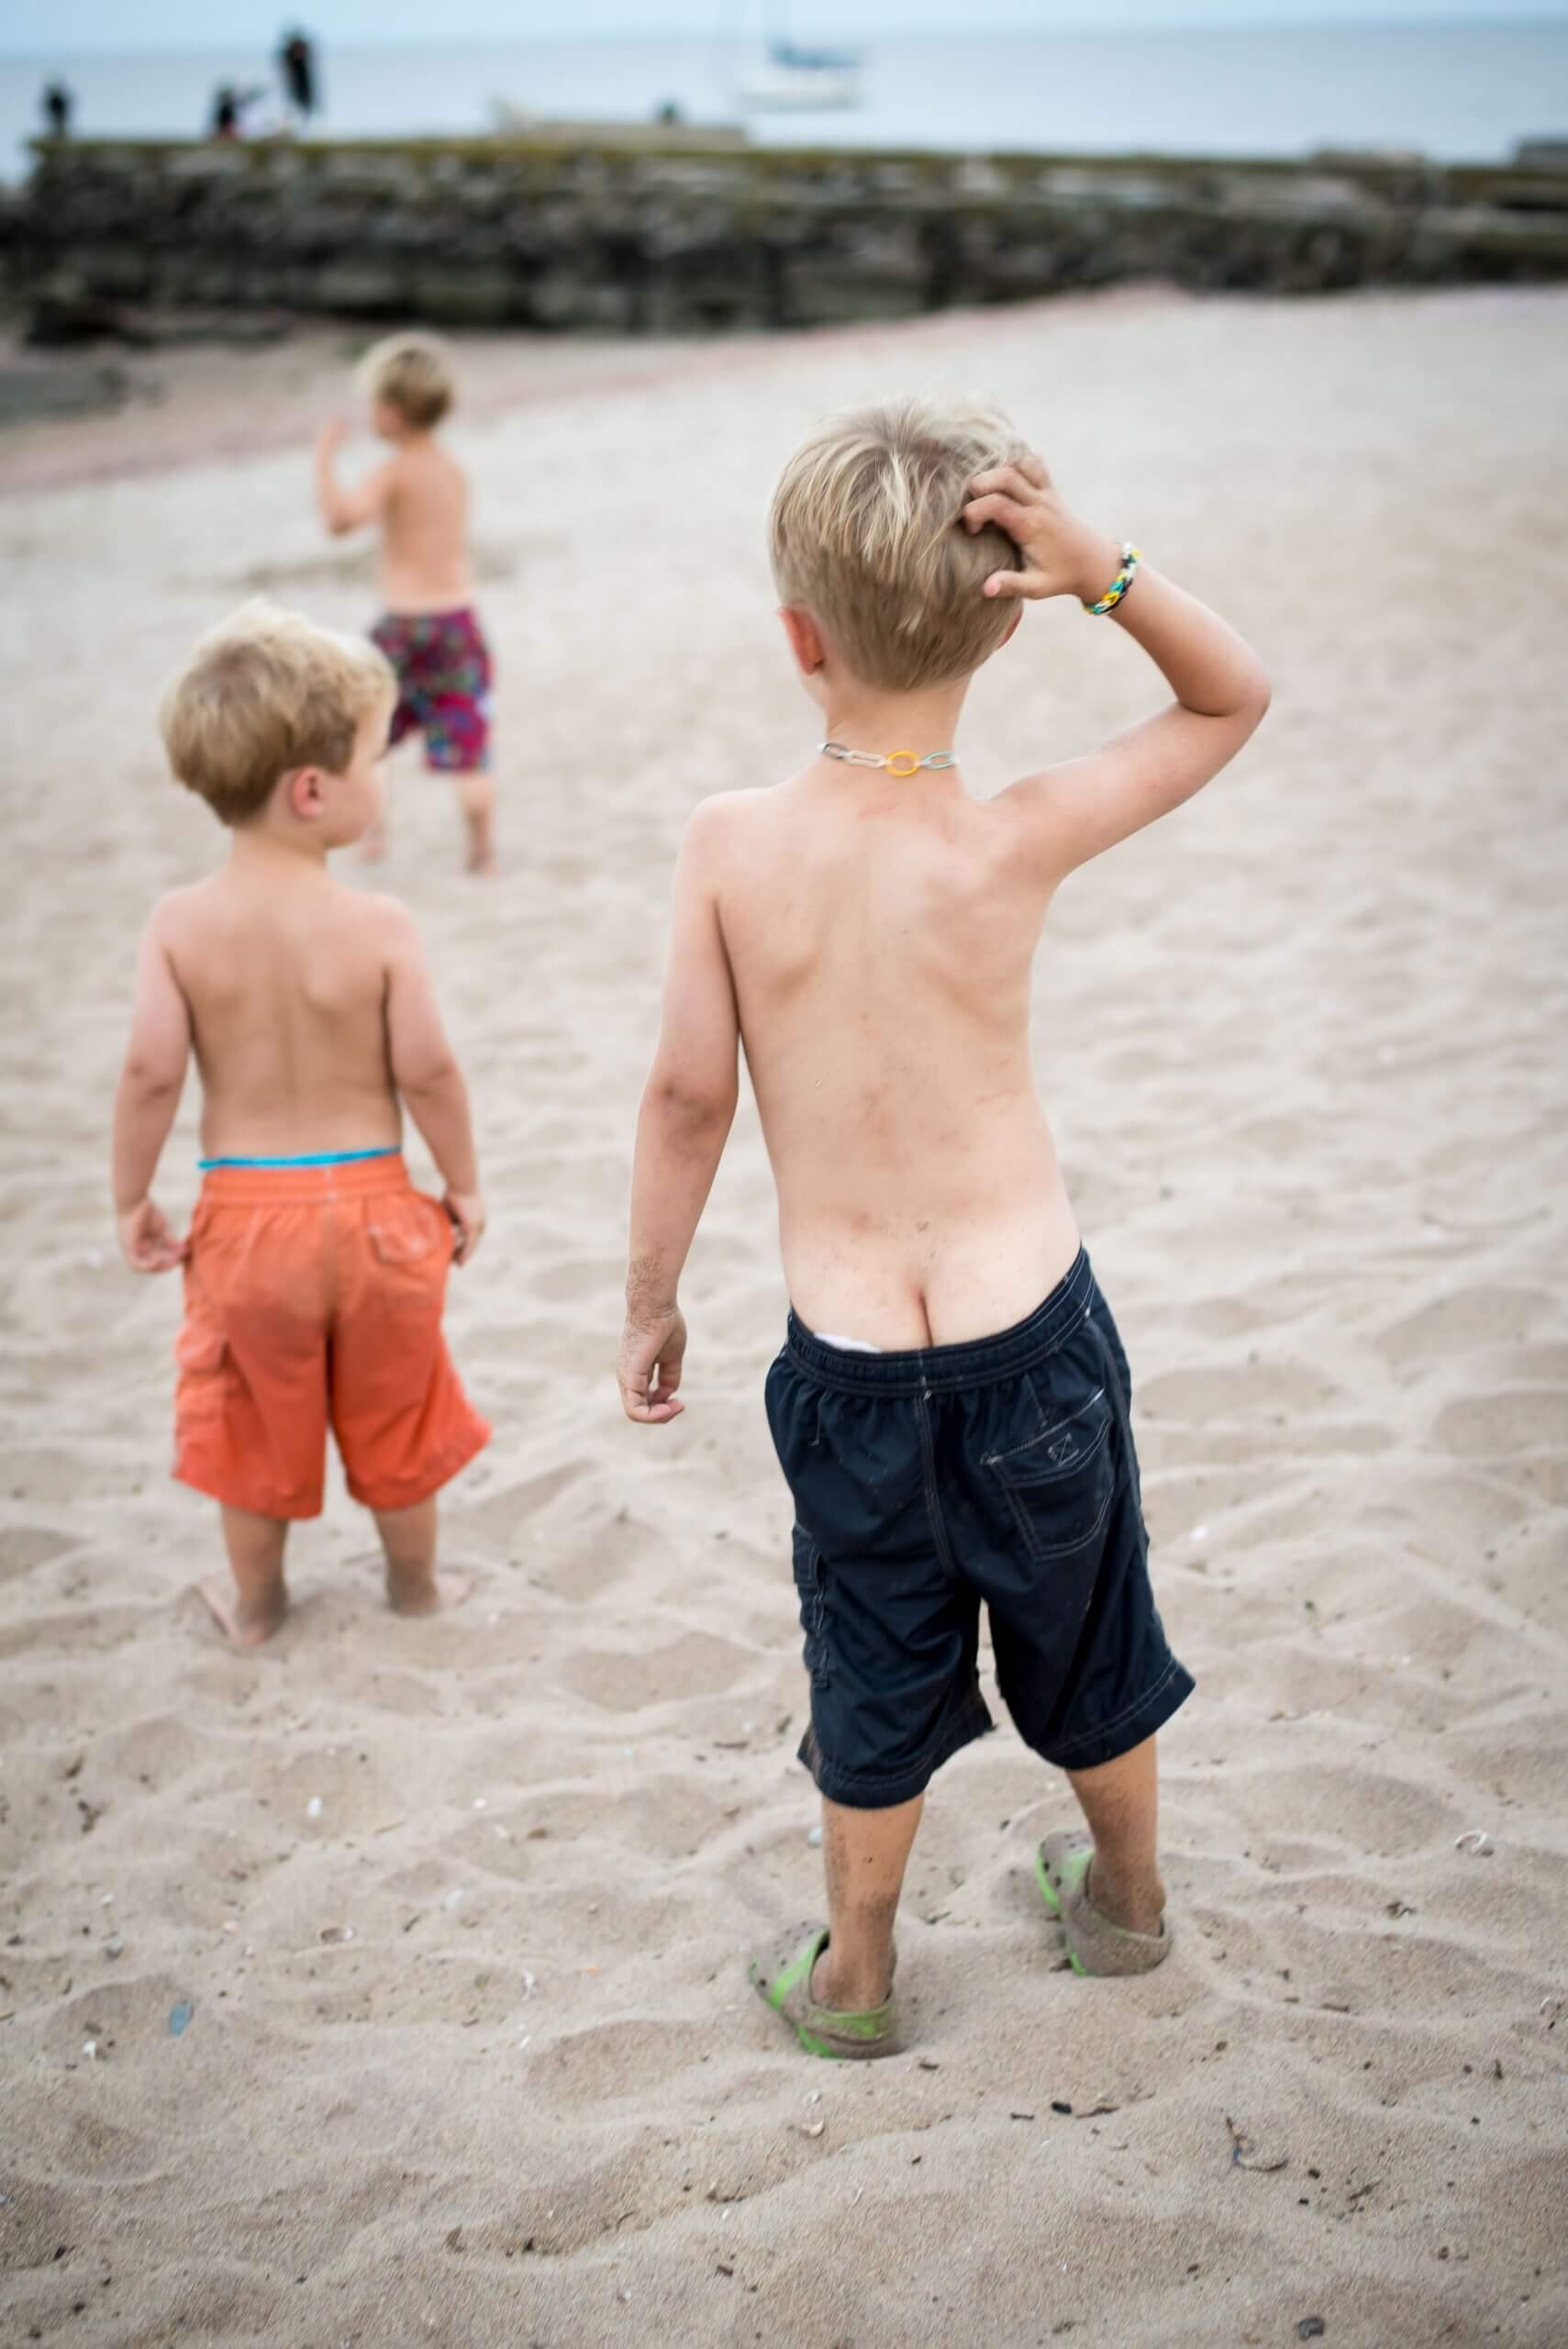 Three boys on a beach. One boy, his shorts falling and exposing part of his bottom, scratches his head and looks forward toward the other boys.